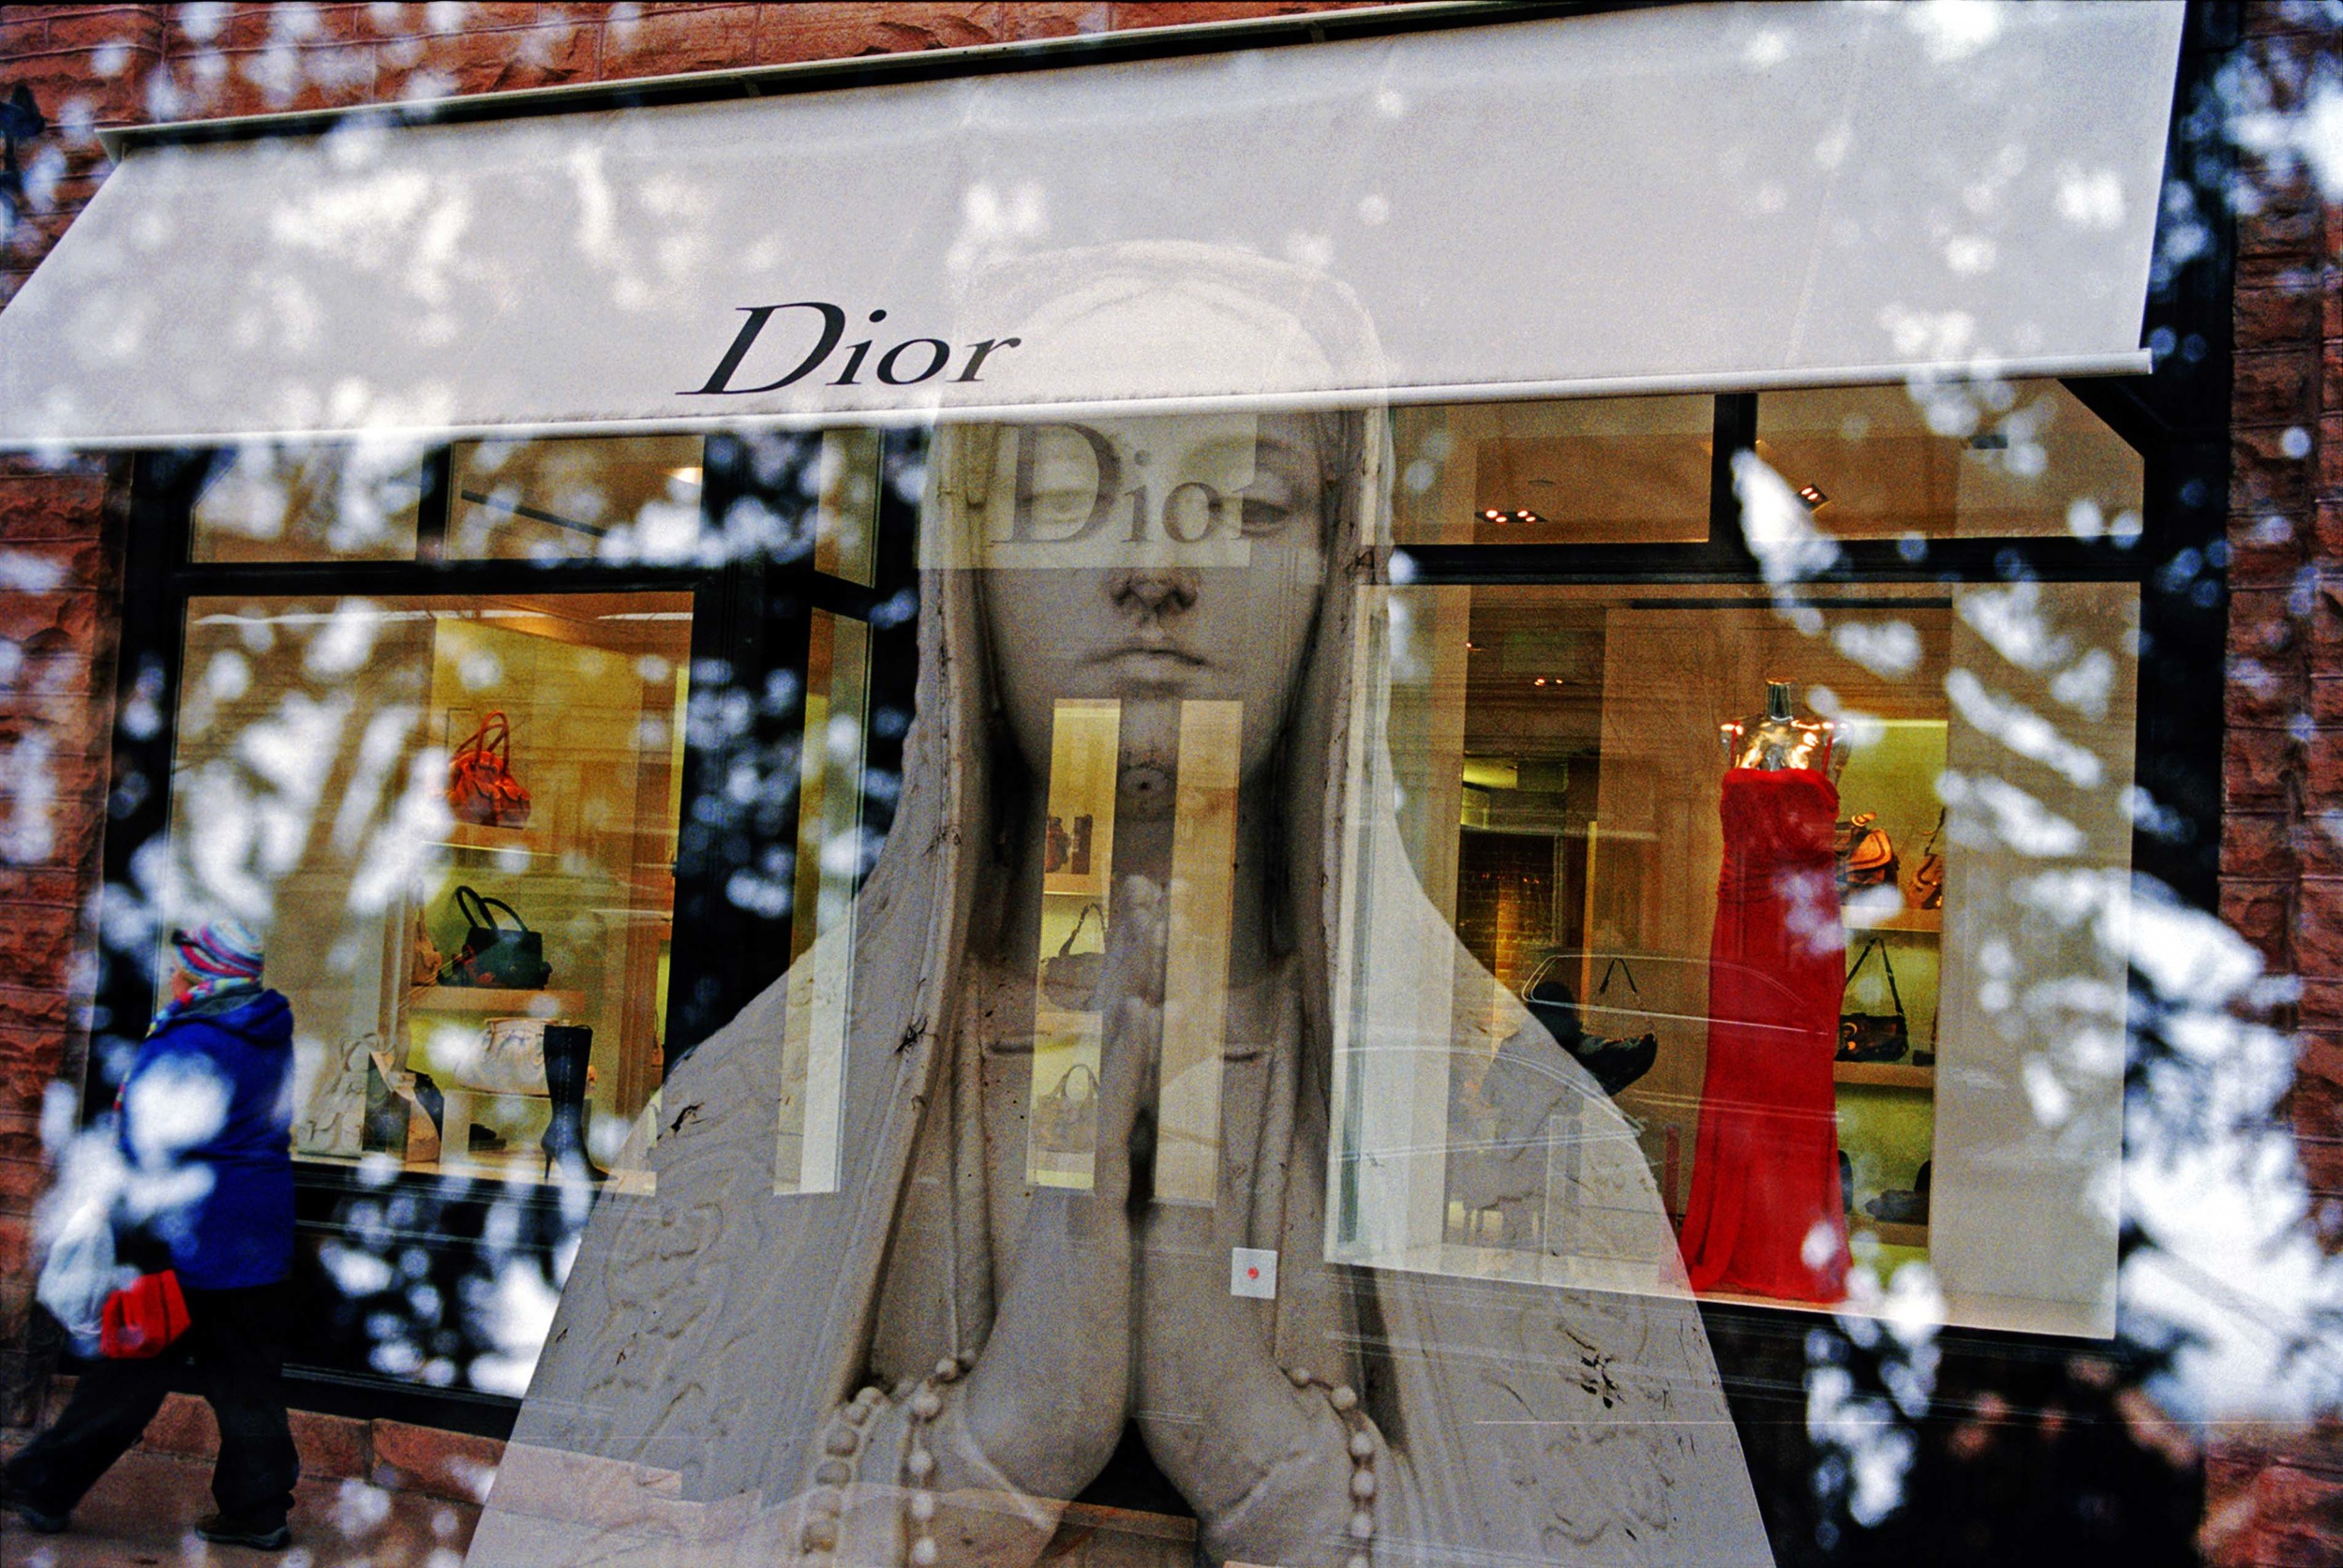 Our Lady of Dior